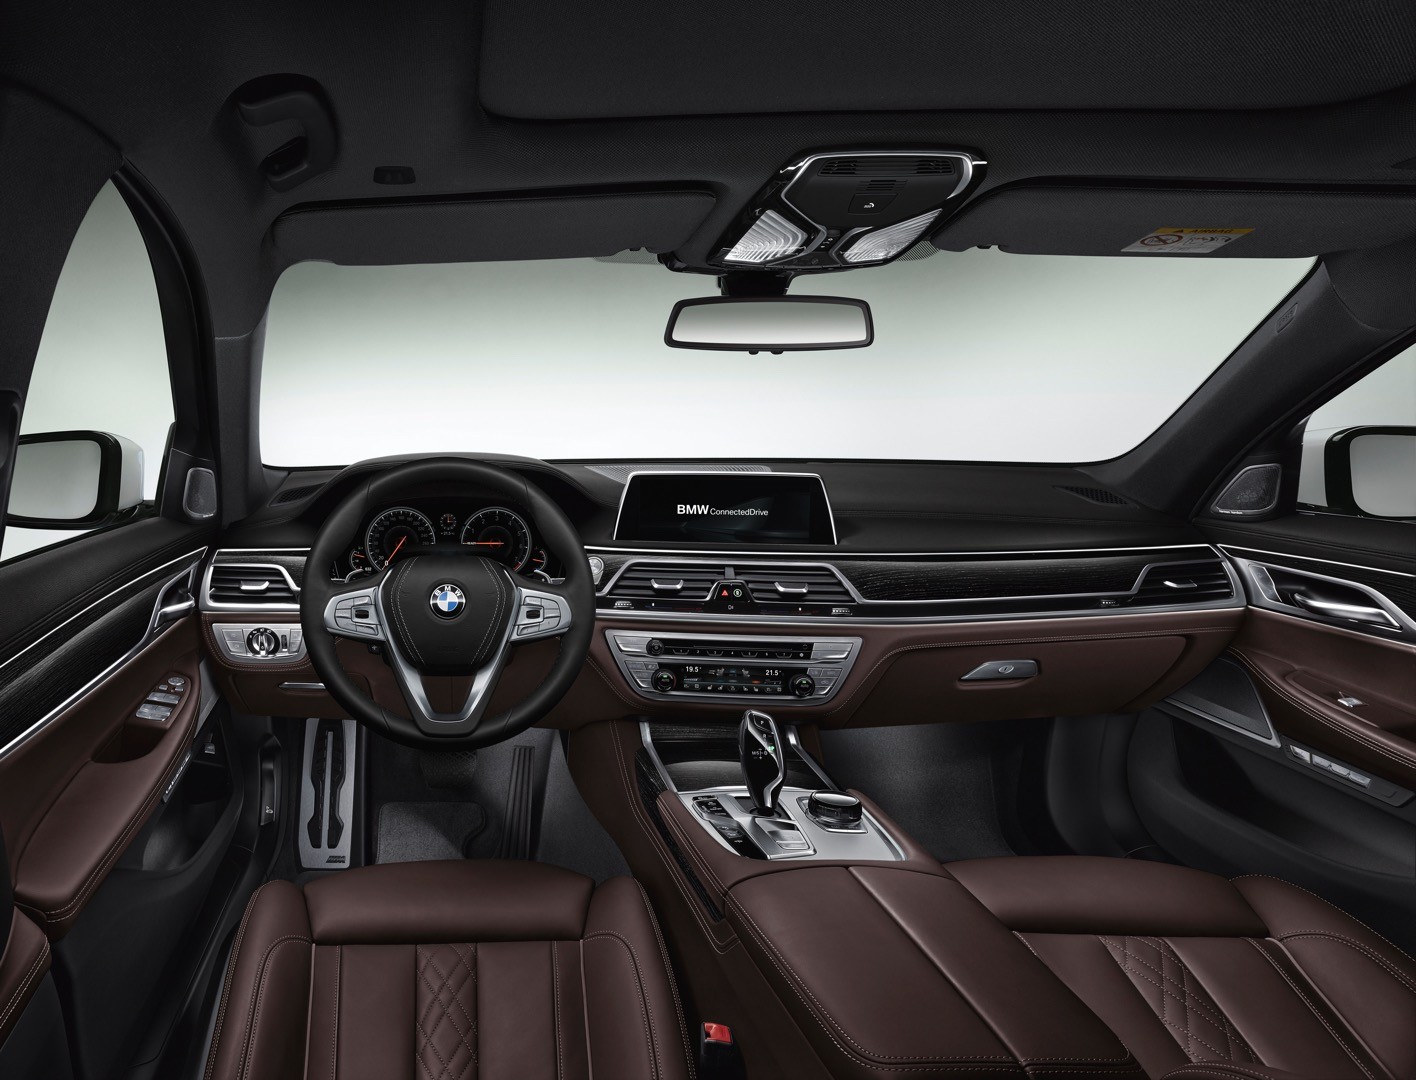 2016-bmw-7-series-finally-officially-unveiled-the-good-stuffs-inside-photo-gallery_116